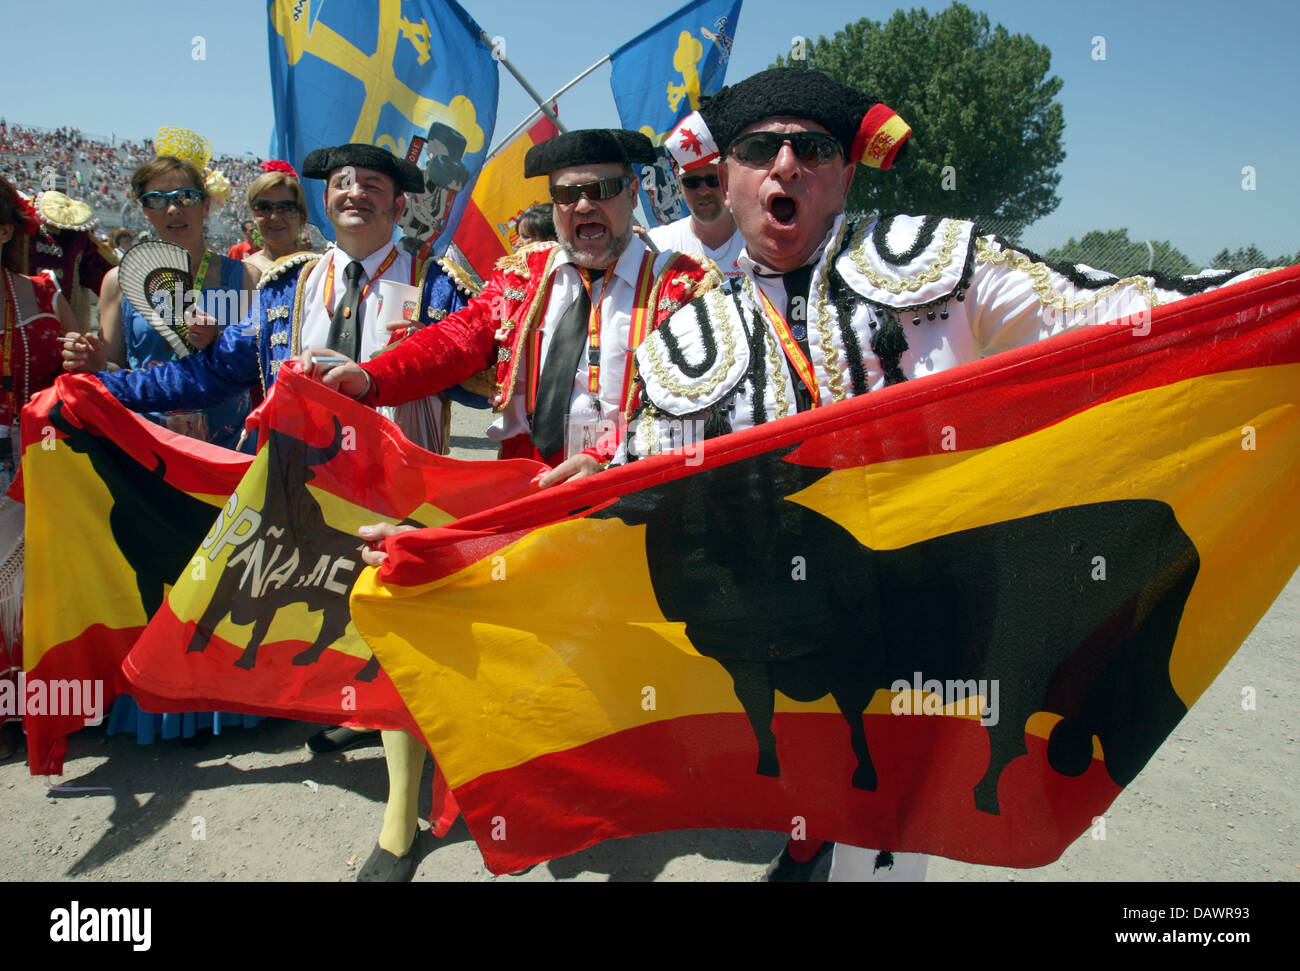 Spanish spectators wave flags to support Spanish Formula One driver Fernando Alonso of McLaren Mercedes before the Formula 1 Grand Prix of Canada at the Gilles Villeneuve race track in Montreal, Canada, 10 June 2007. Photo: GERO BRELOER Stock Photo